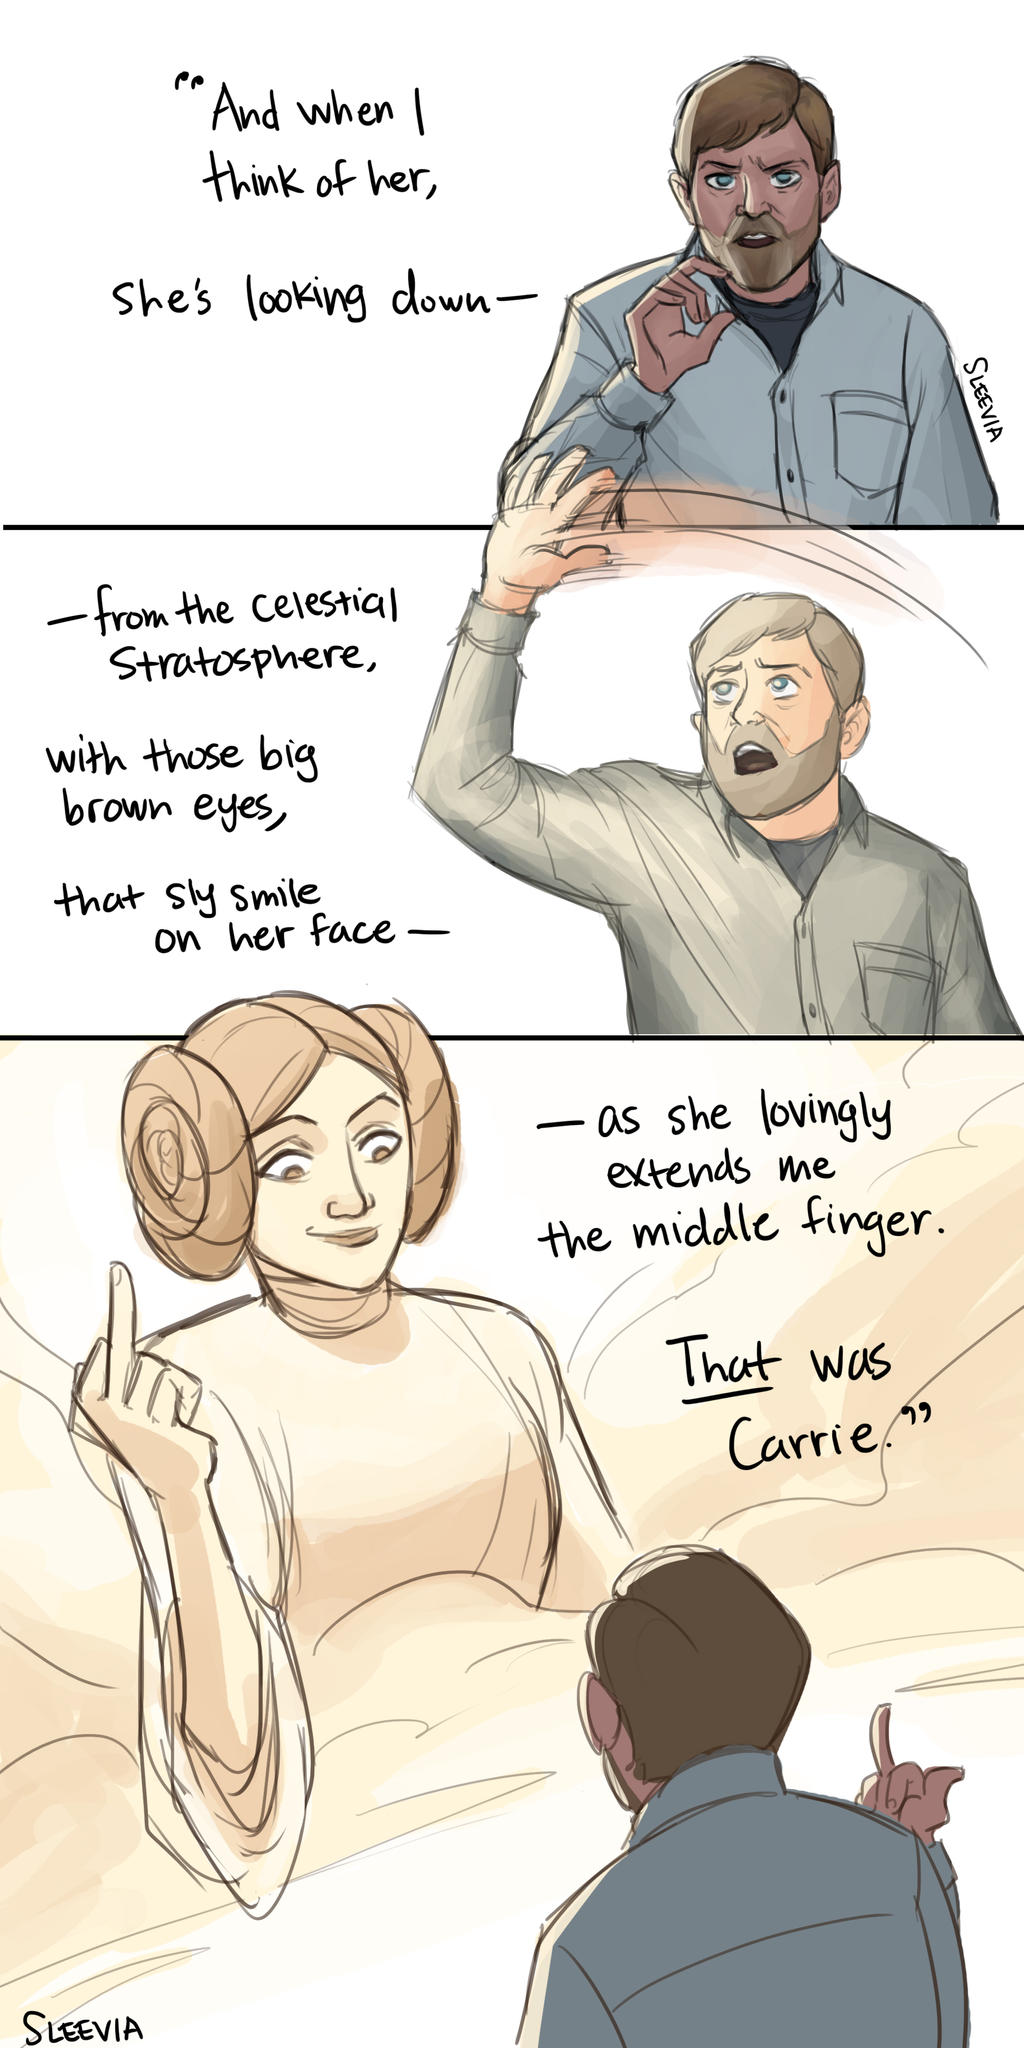 Mark Hamill on Carrie Fisher by Sleevia on DeviantArt